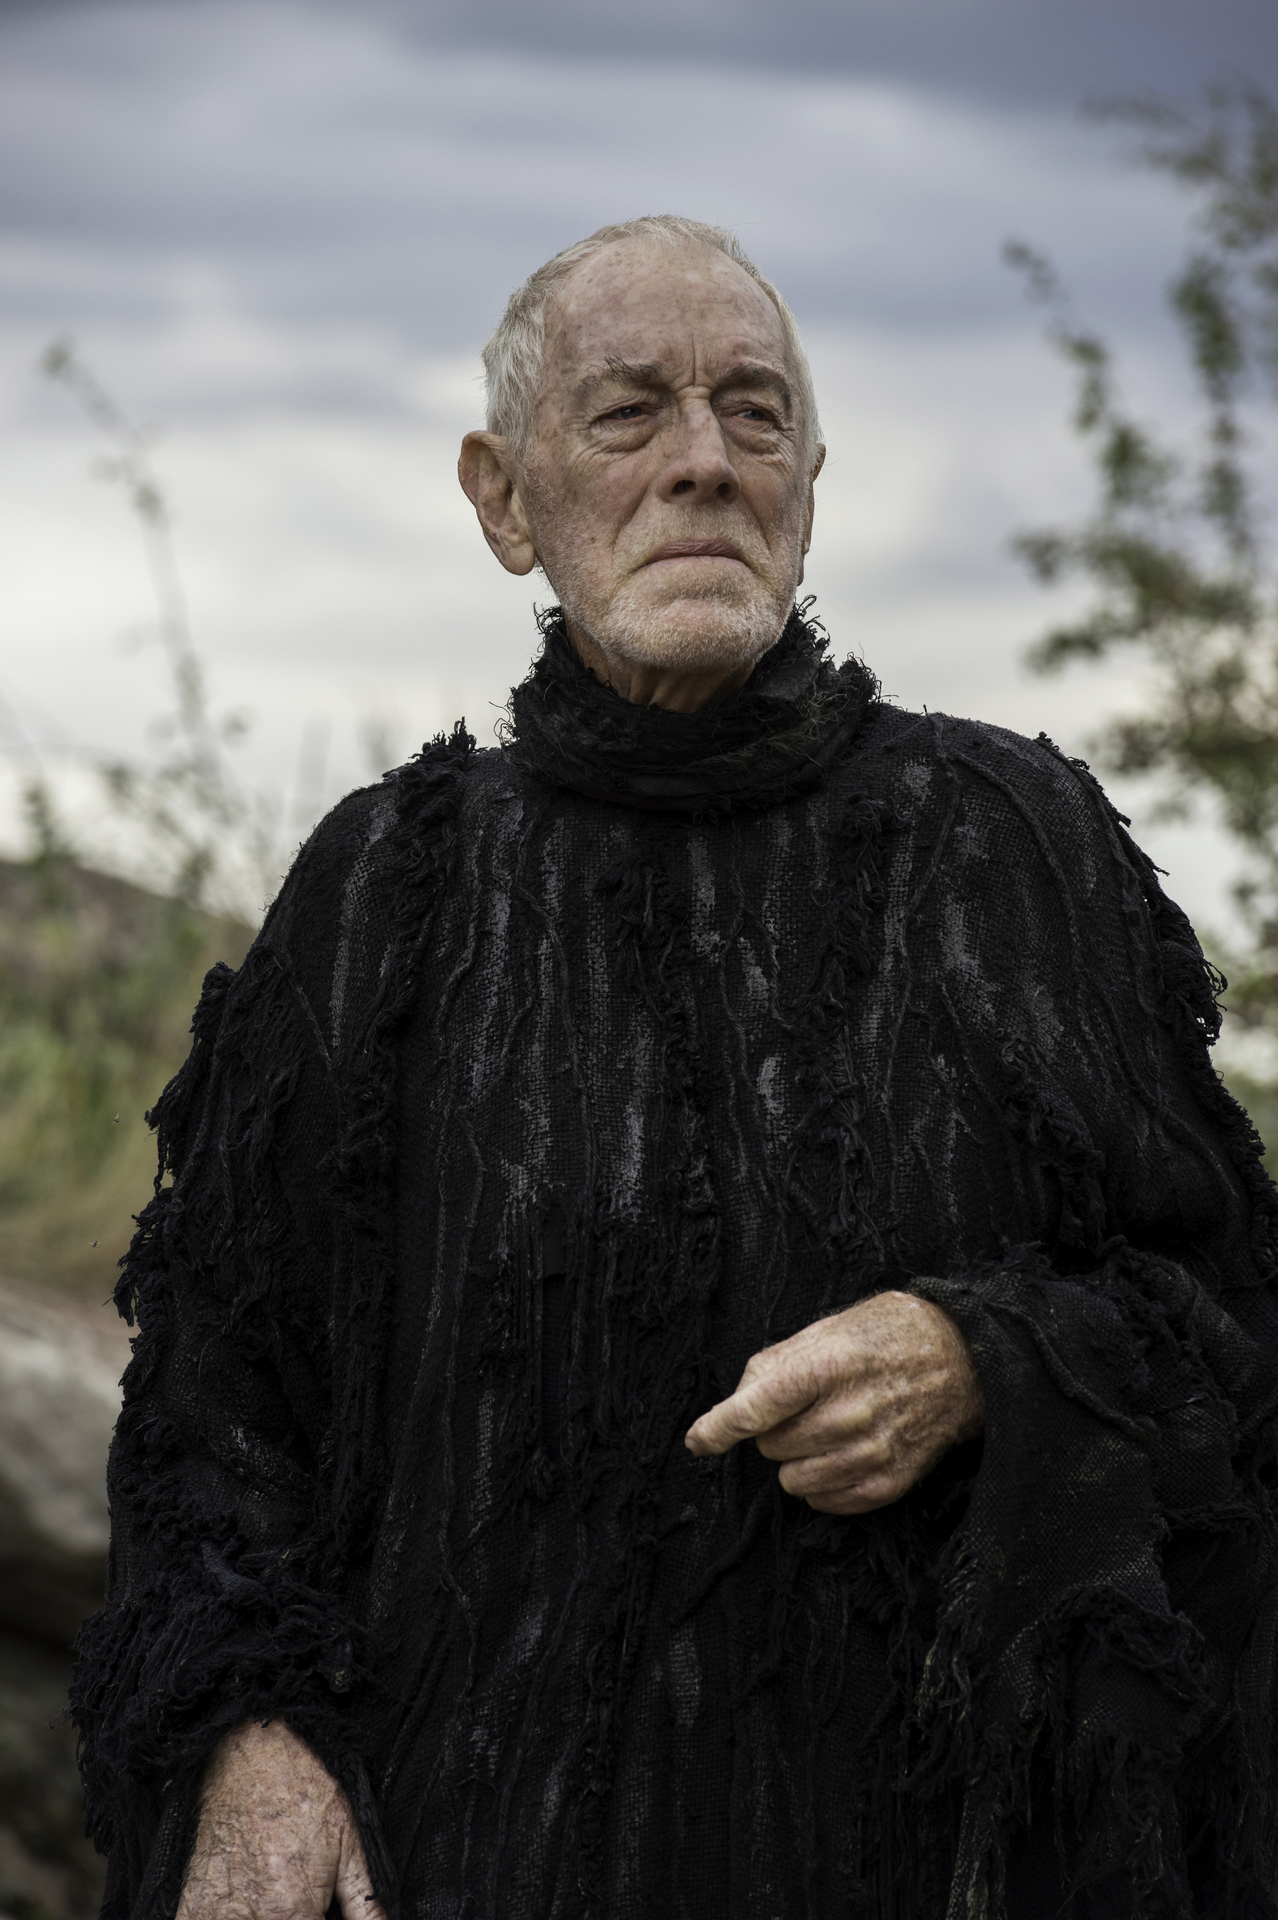 An older man in a textured black outfit stands outdoors, looking deeply into the distance